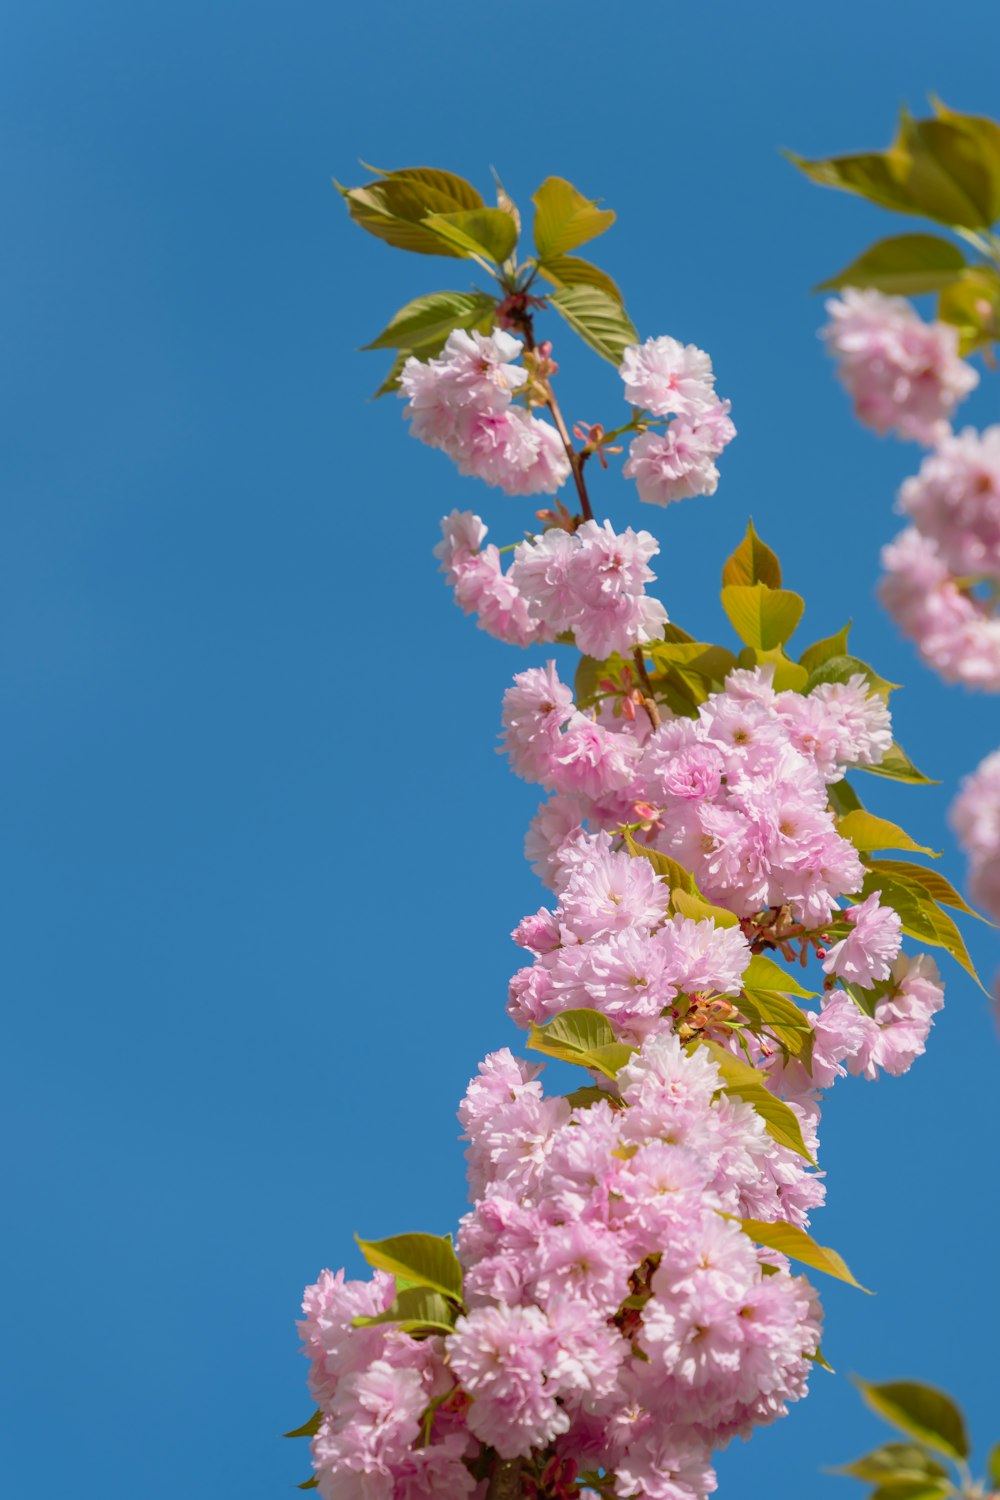 a branch of pink flowers with green leaves against a blue sky